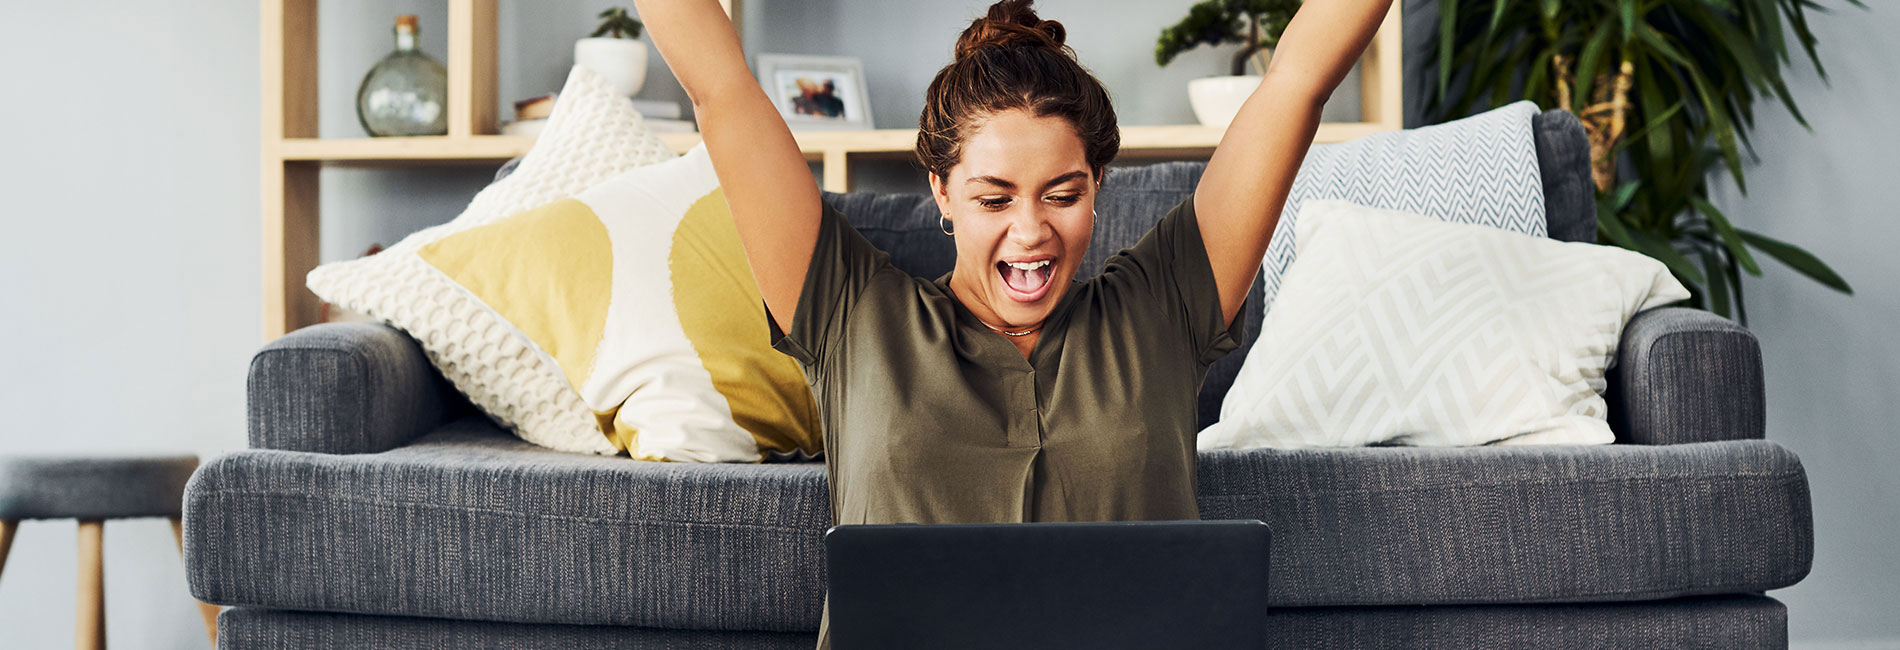 Woman Cheering in front of her Laptop